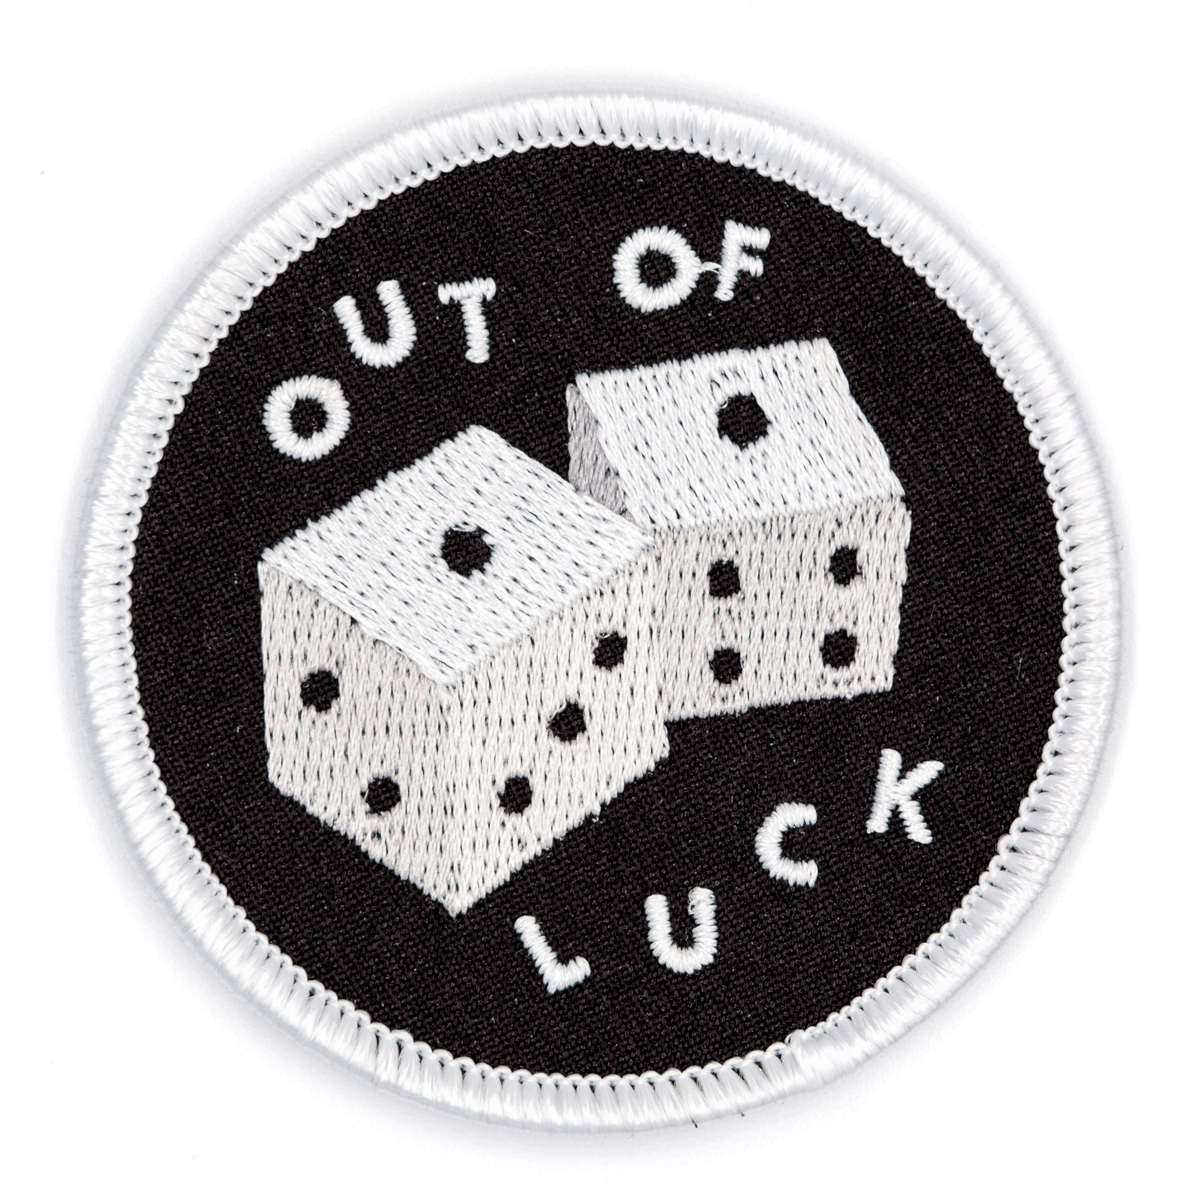 Out Of Luck Embroidered Iron-On Patch: 2.5" wide